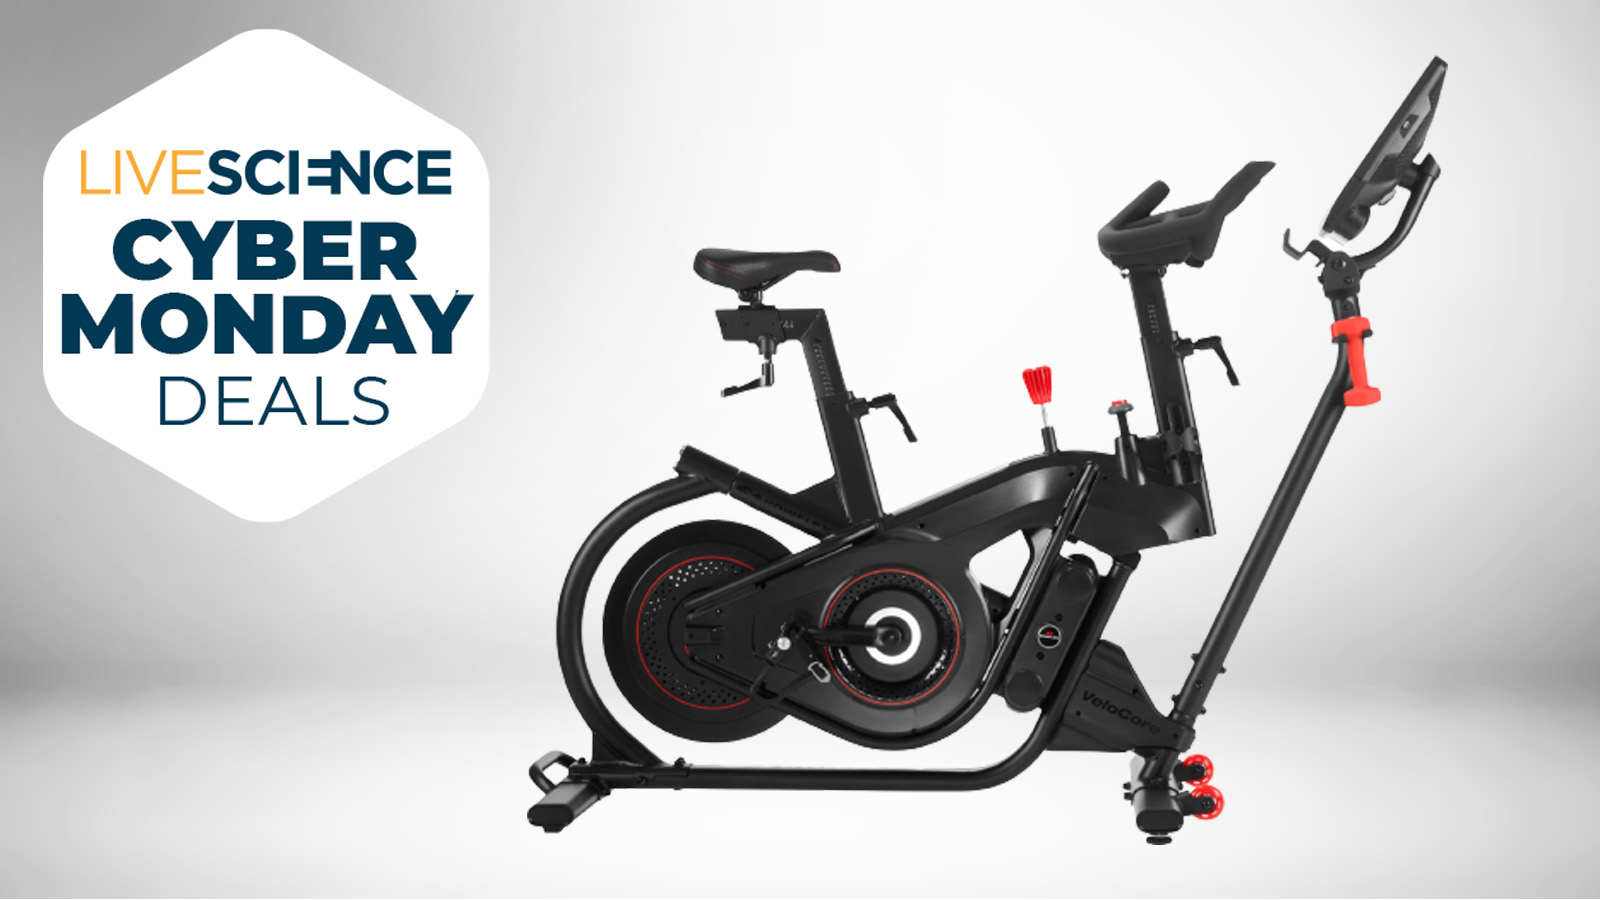 Just a few hours left to cash in on this Cyber Monday deal — $900 off the Bowflex VeloCore Bike